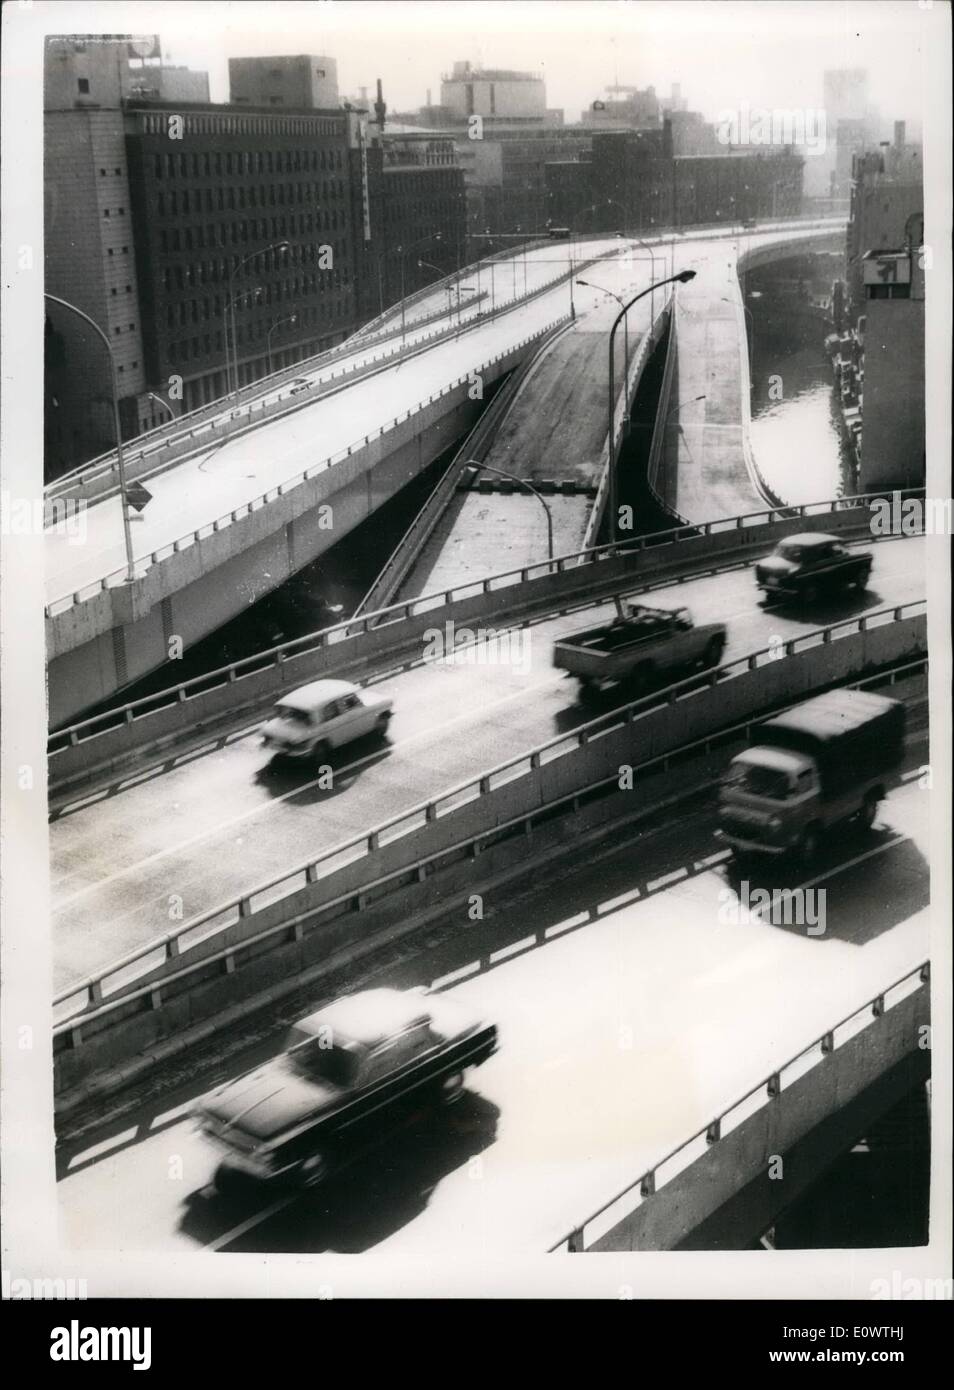 Apr. 04, 1964 - All roads lead to the Tokyo Olympics; The vast network of highways and express ways, elevated and subterranean, Stock Photo